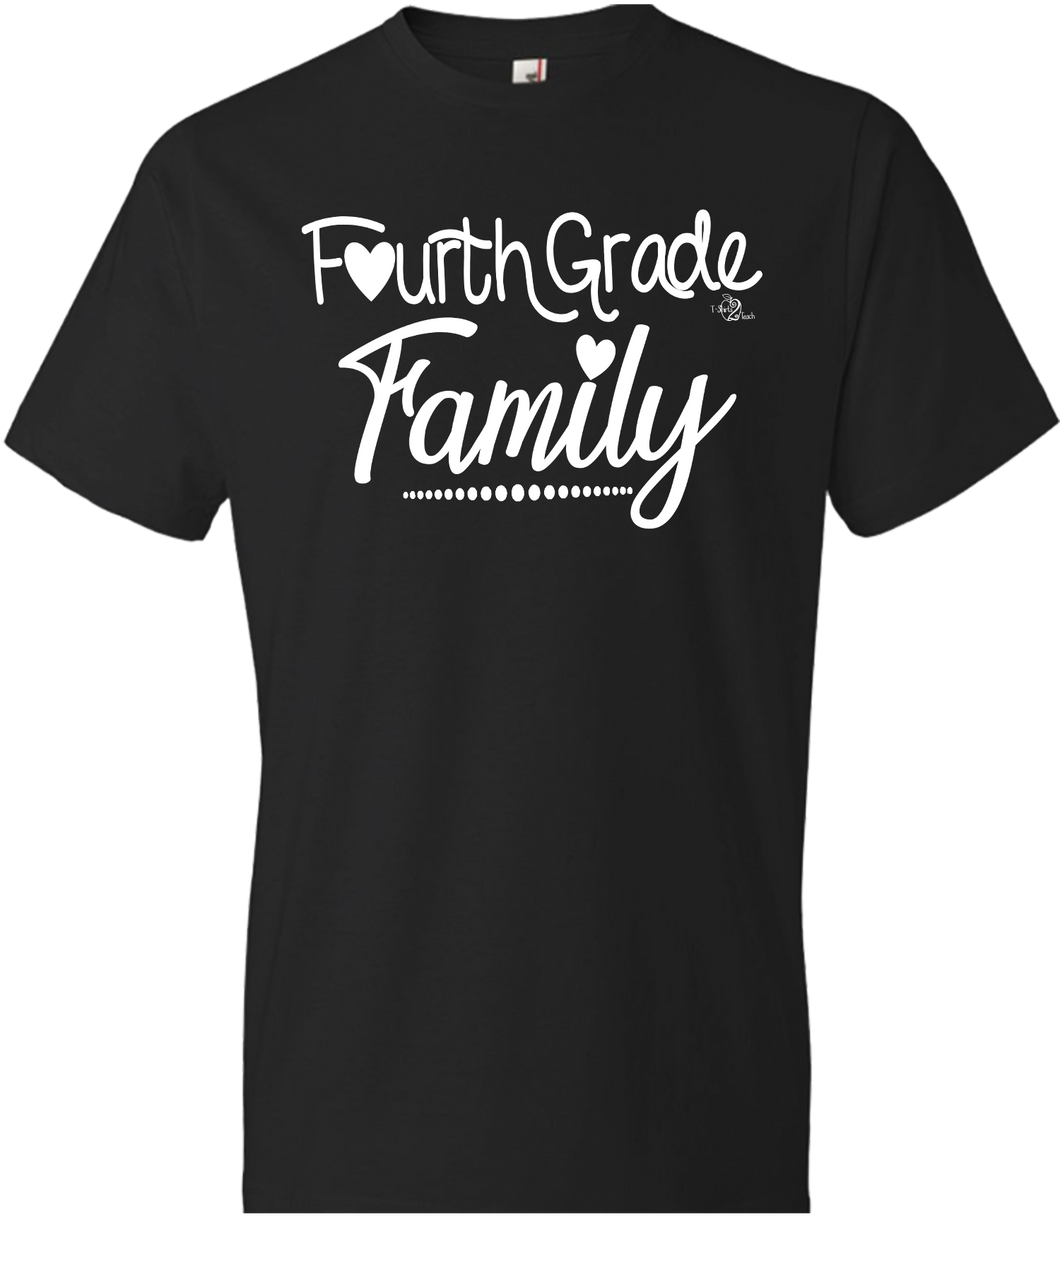 4th Grade Family Grade Level Tee (ONLY Size Small, XL, 2X, 3X)